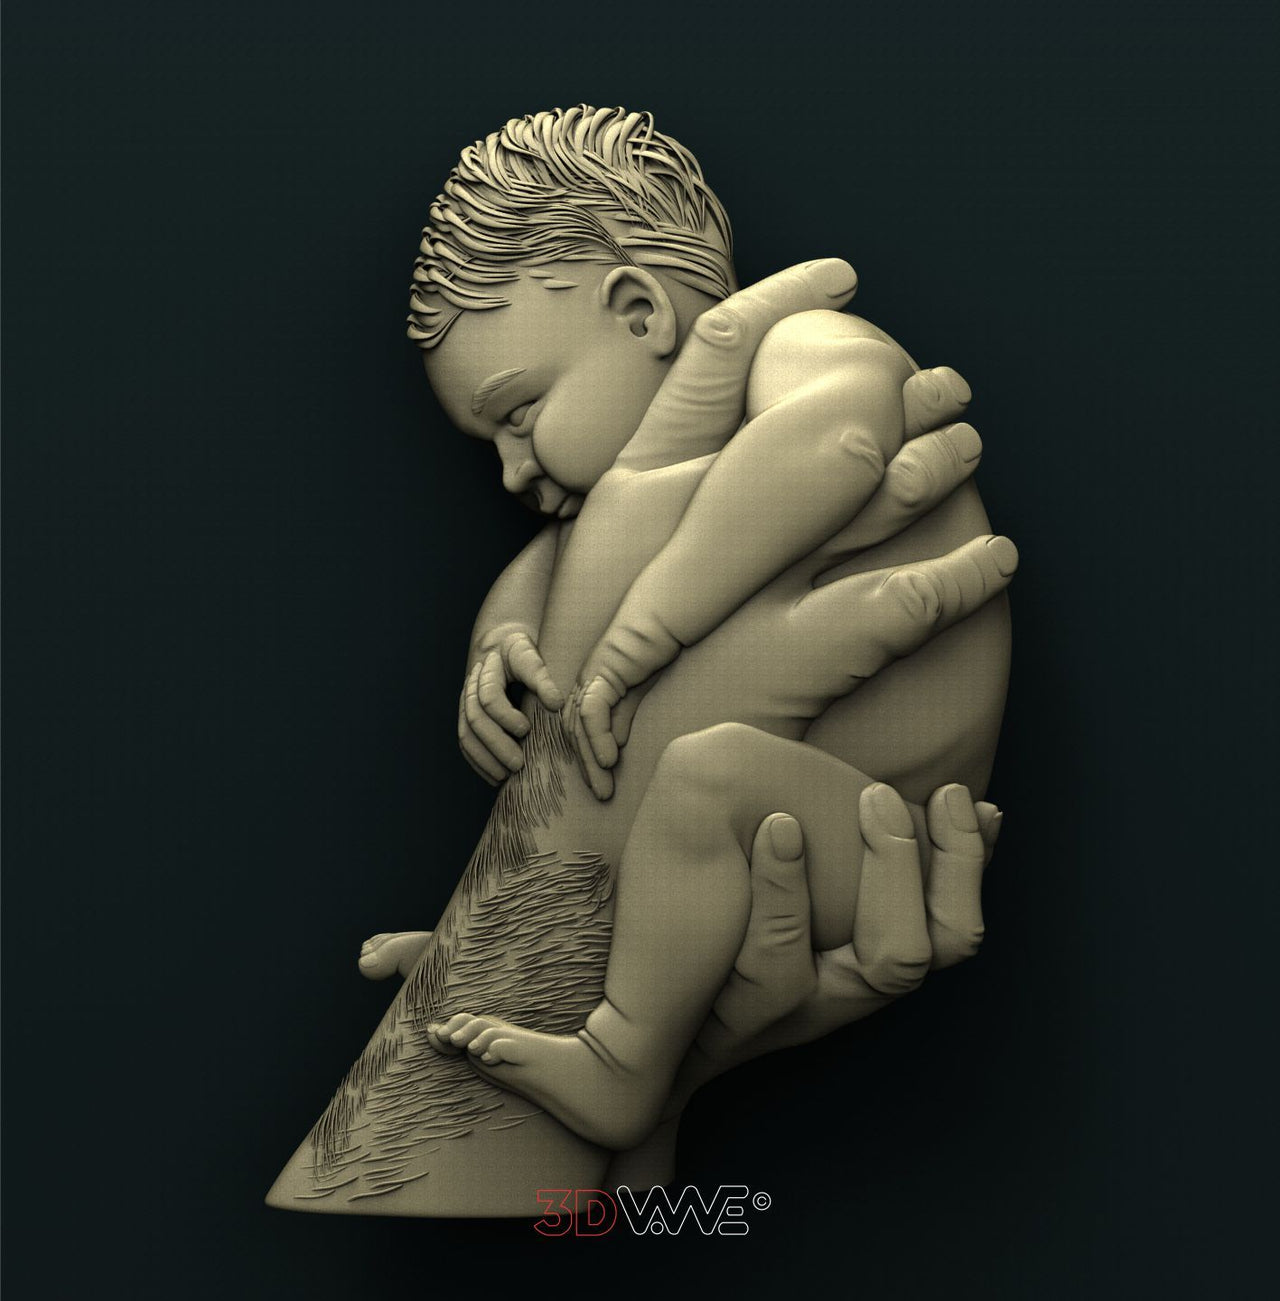 FATHER AND SON 3D STL 3DWave